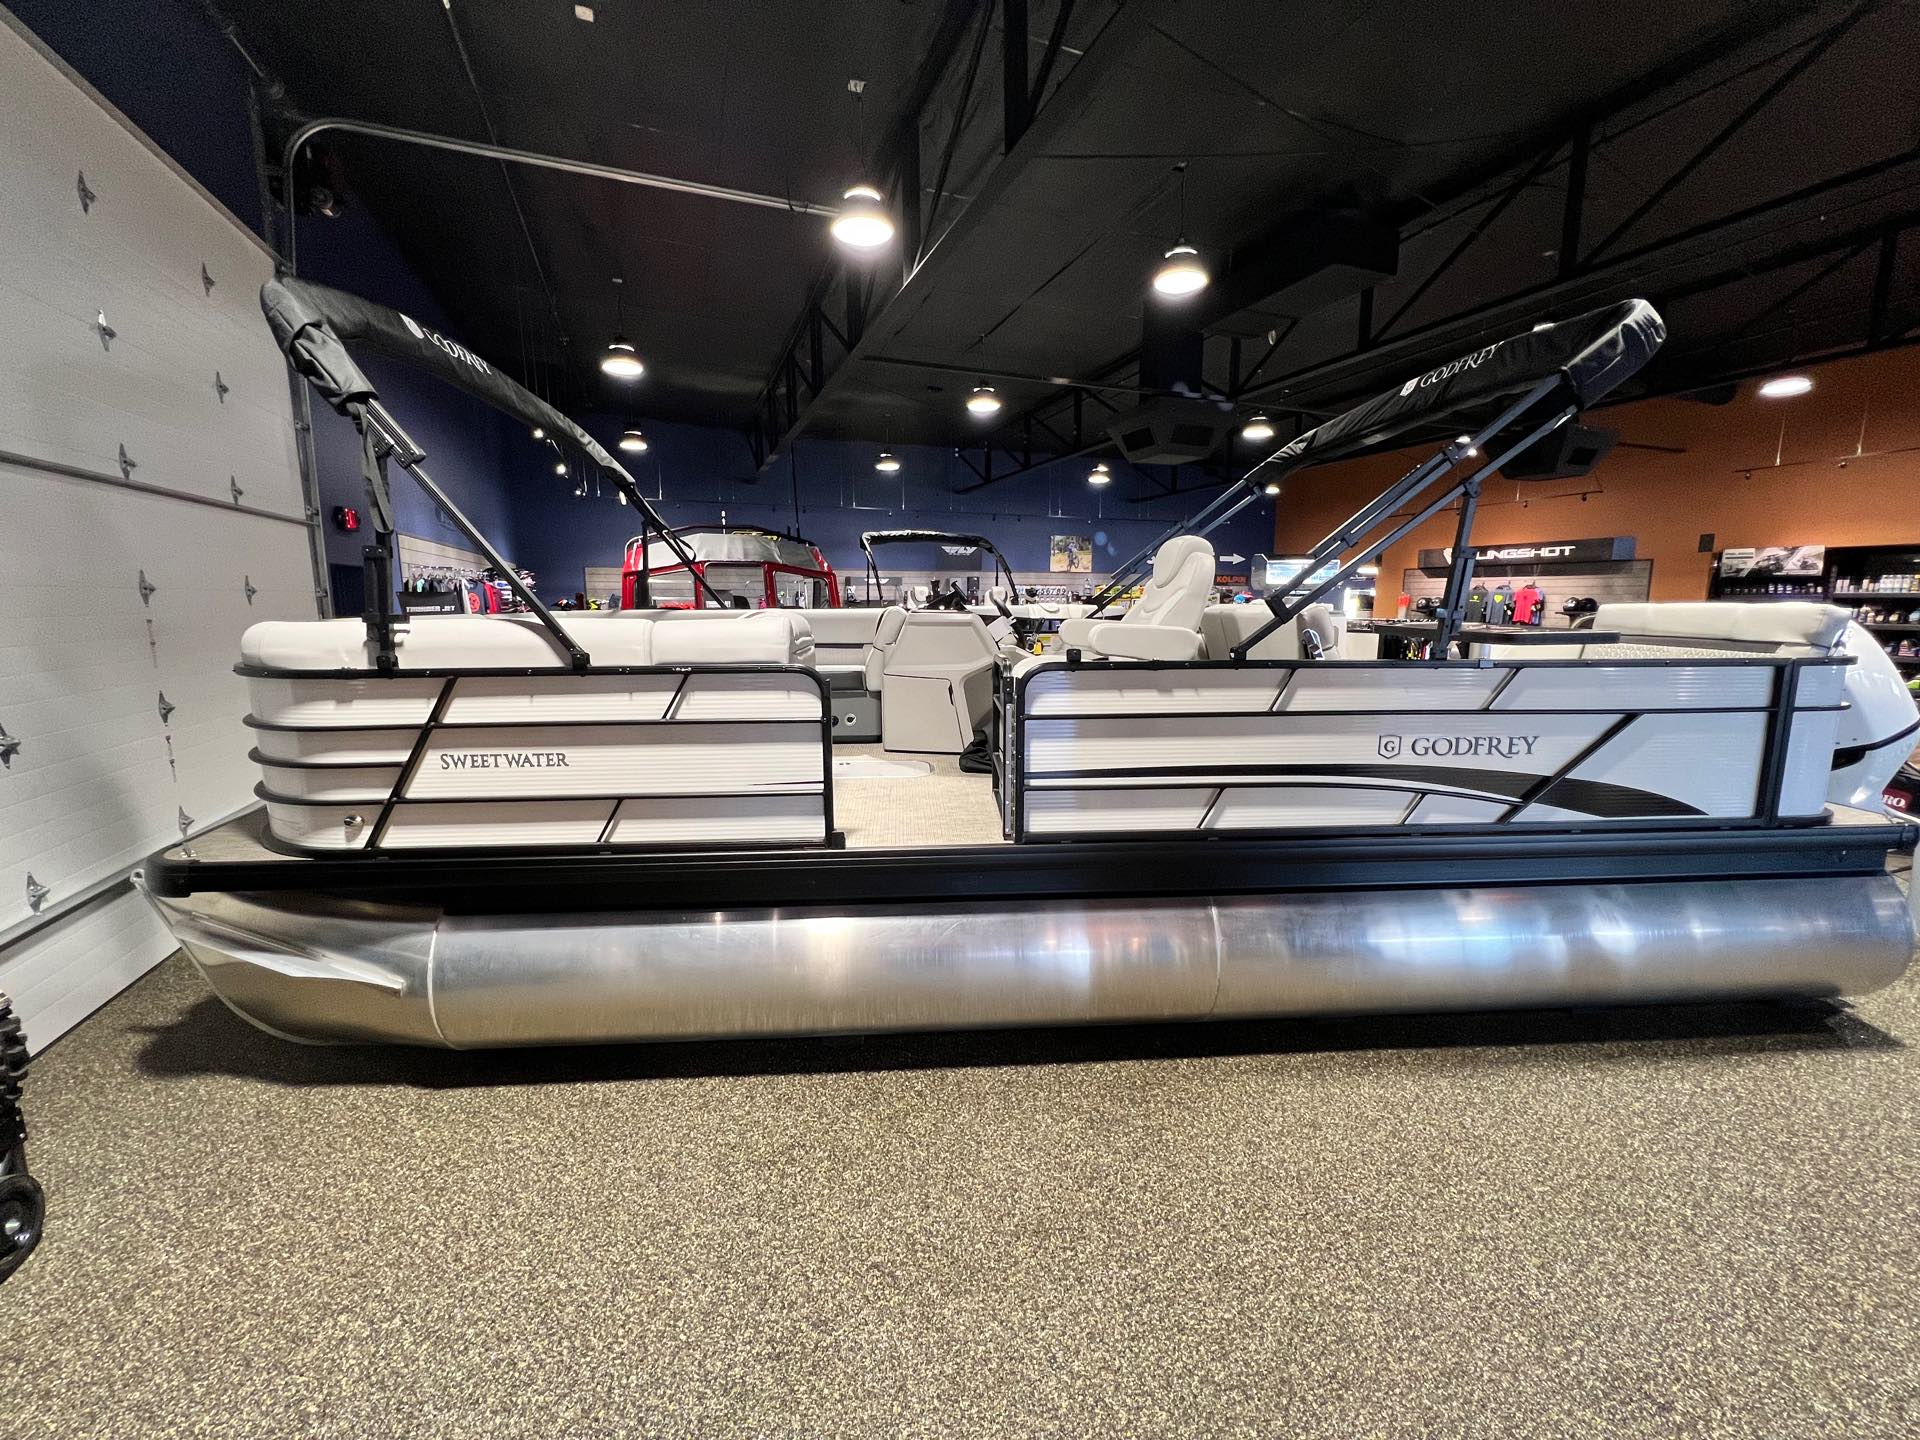 2022 Sweetwater Entertainment SW 2386 DT at Guy's Outdoor Motorsports & Marine